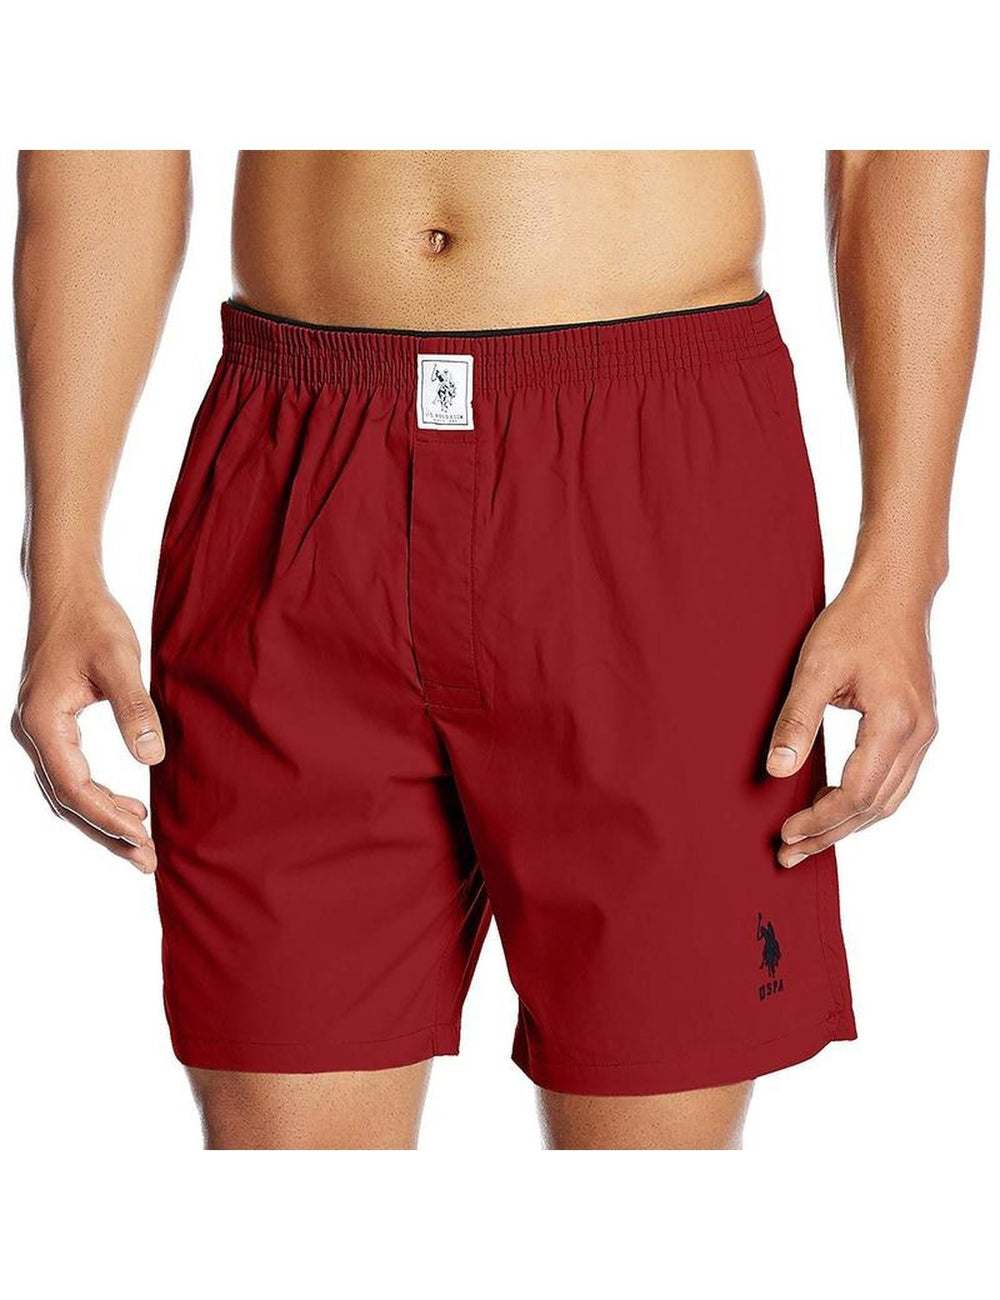 US Polo Red Cotton Boxer Shorts for Men